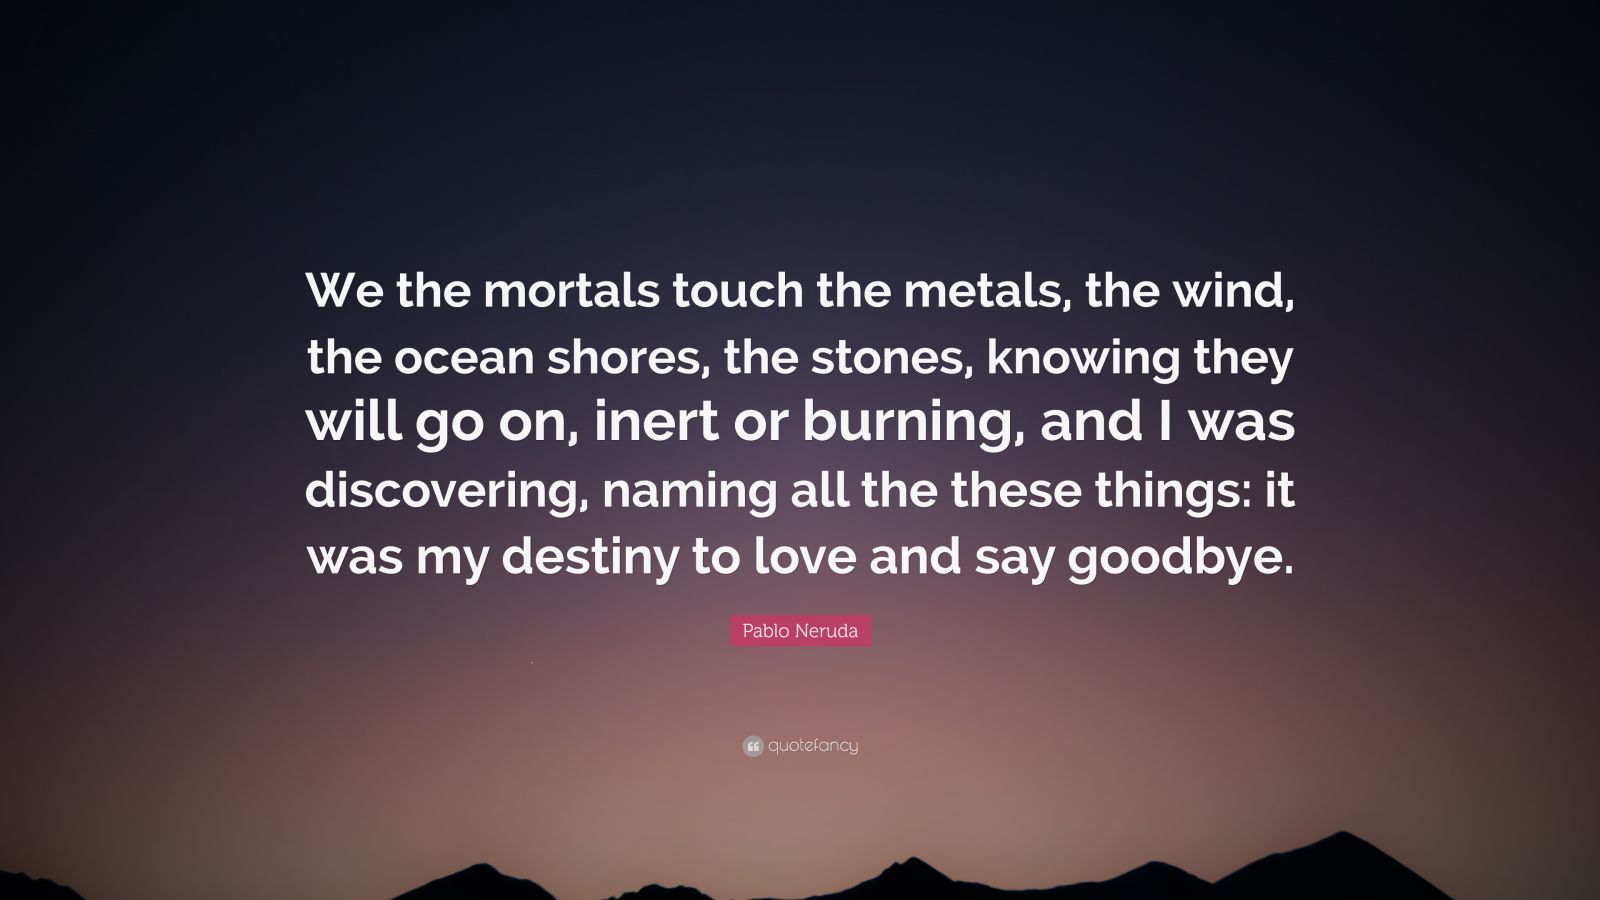 Pablo Neruda Quote “We the mortals touch the metals the wind the